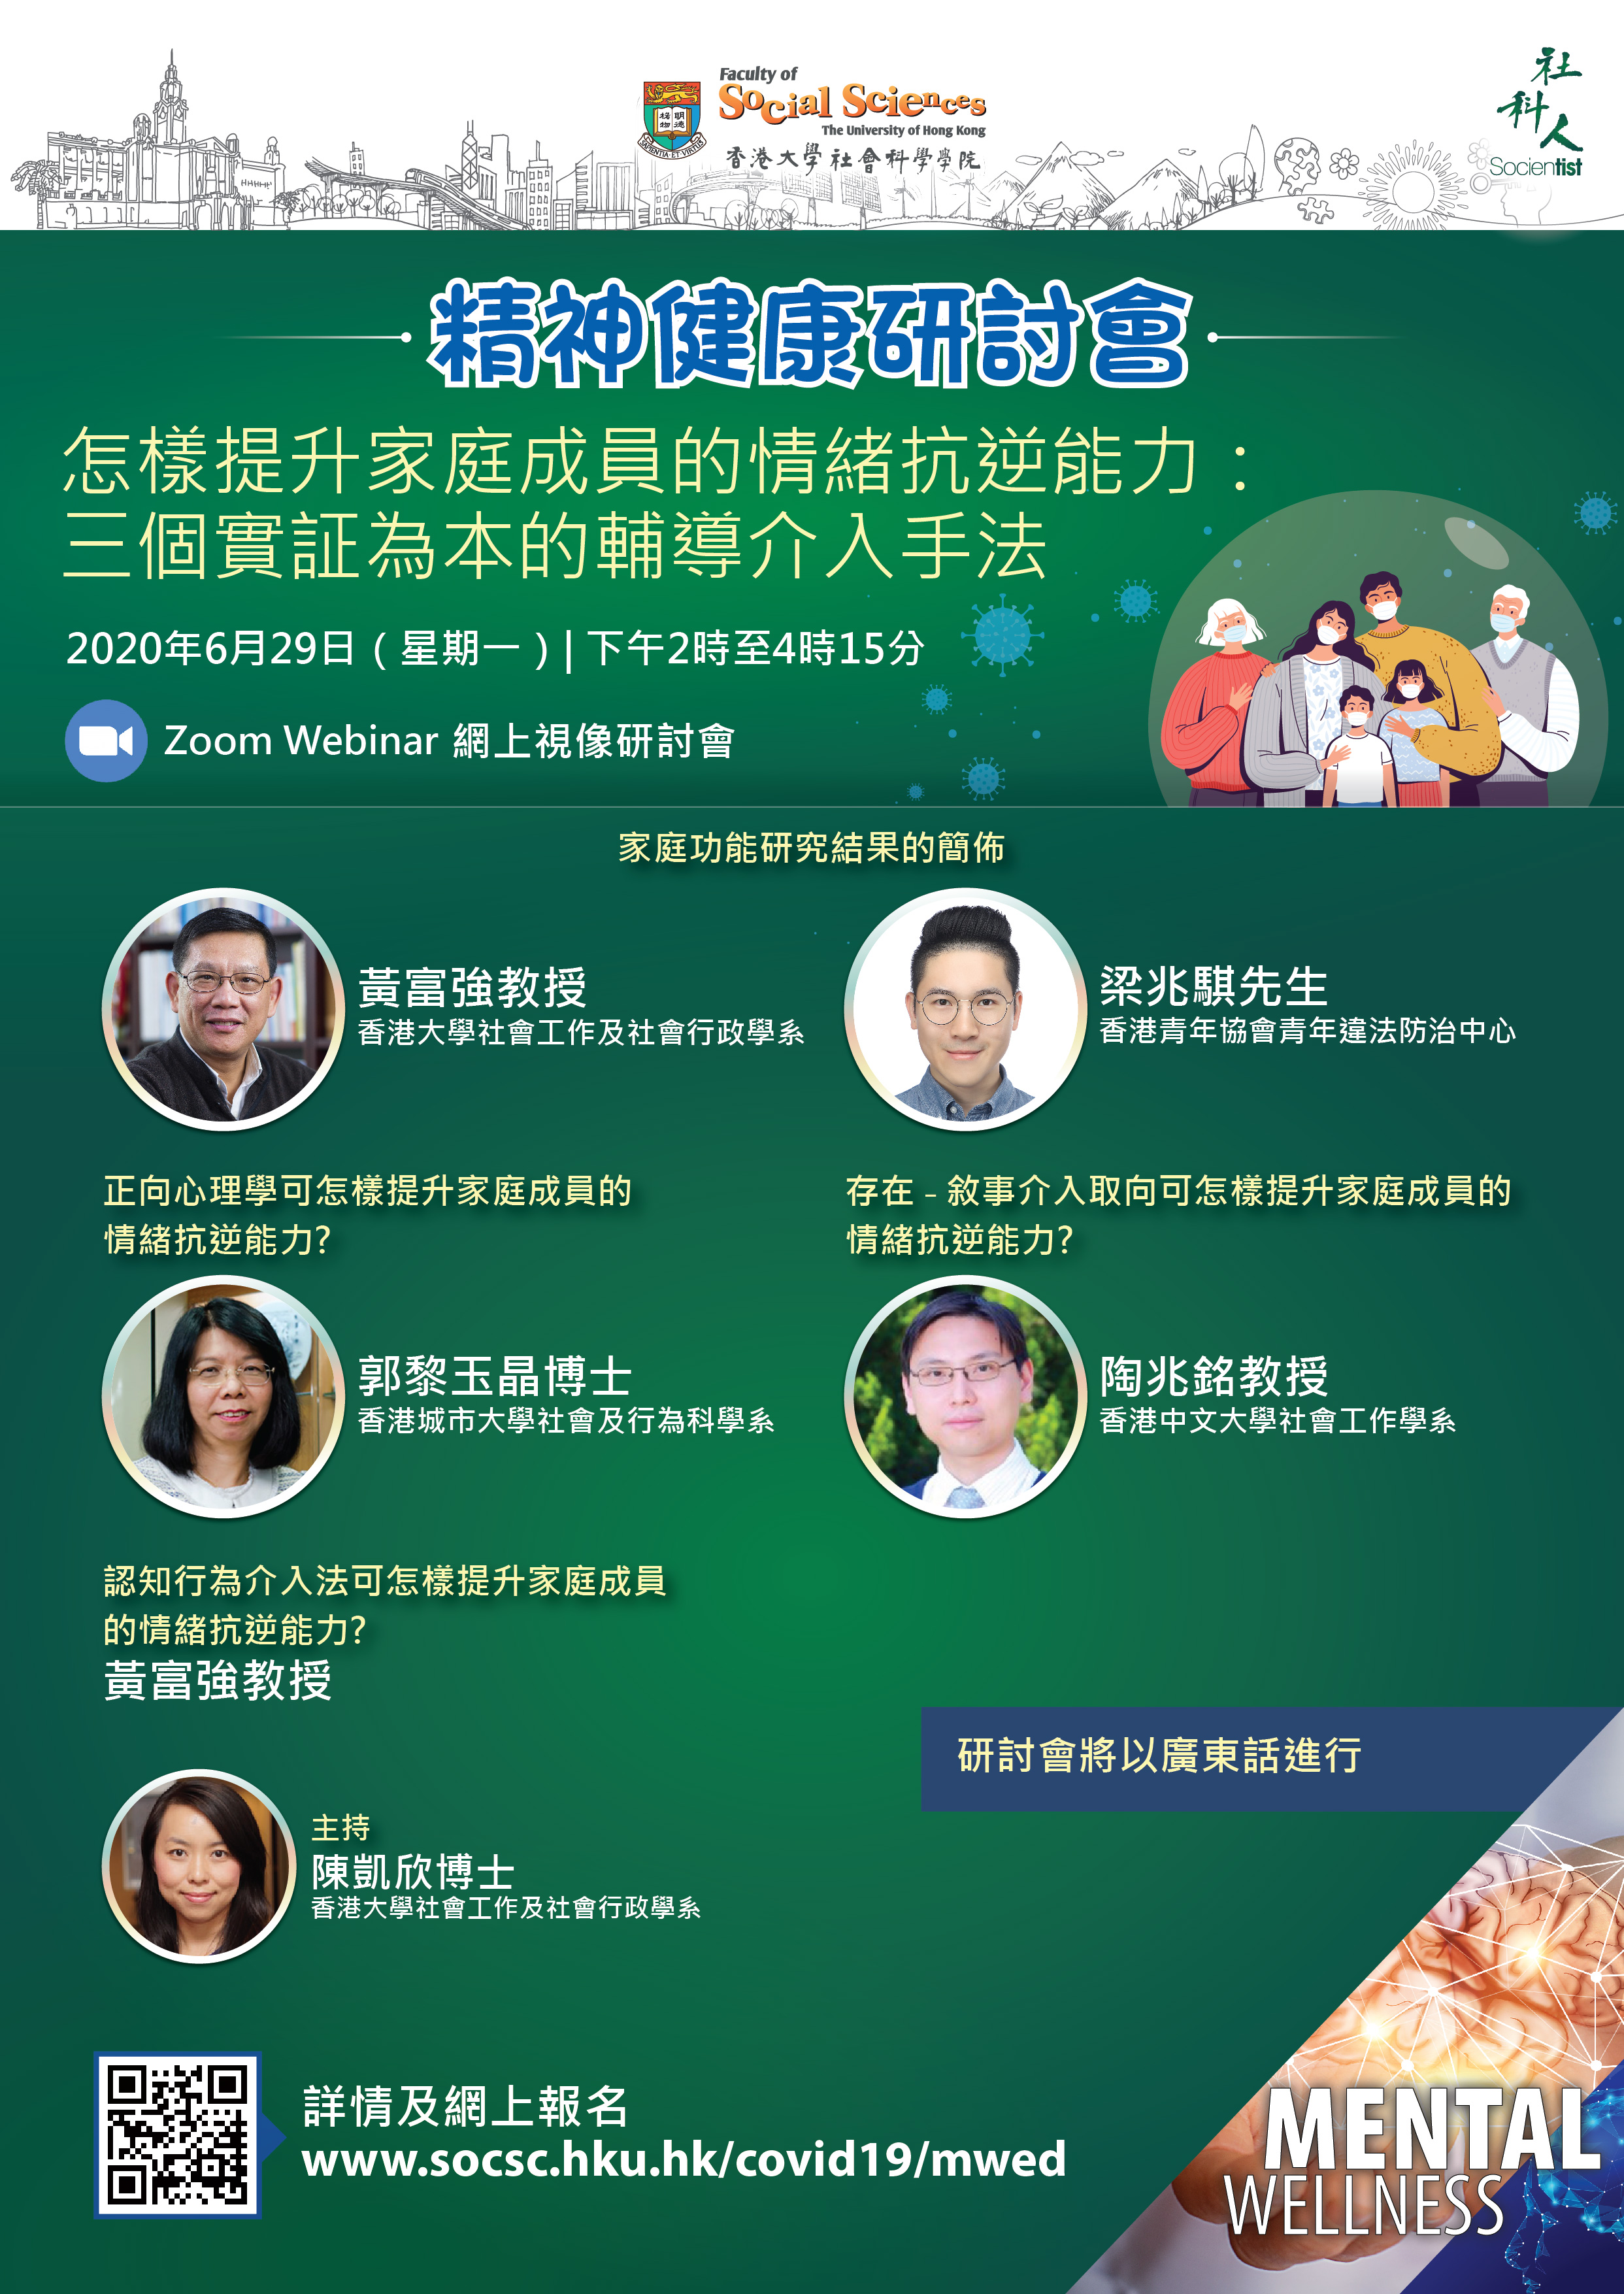 Enhancing Emotional Resilience in Chinese Families in Hong Kong: Evidence-Based Intervention Approaches  【精神健康研討會】怎樣提升家庭成員的情緒抗逆能力：三個實証為本的輔導介入手法